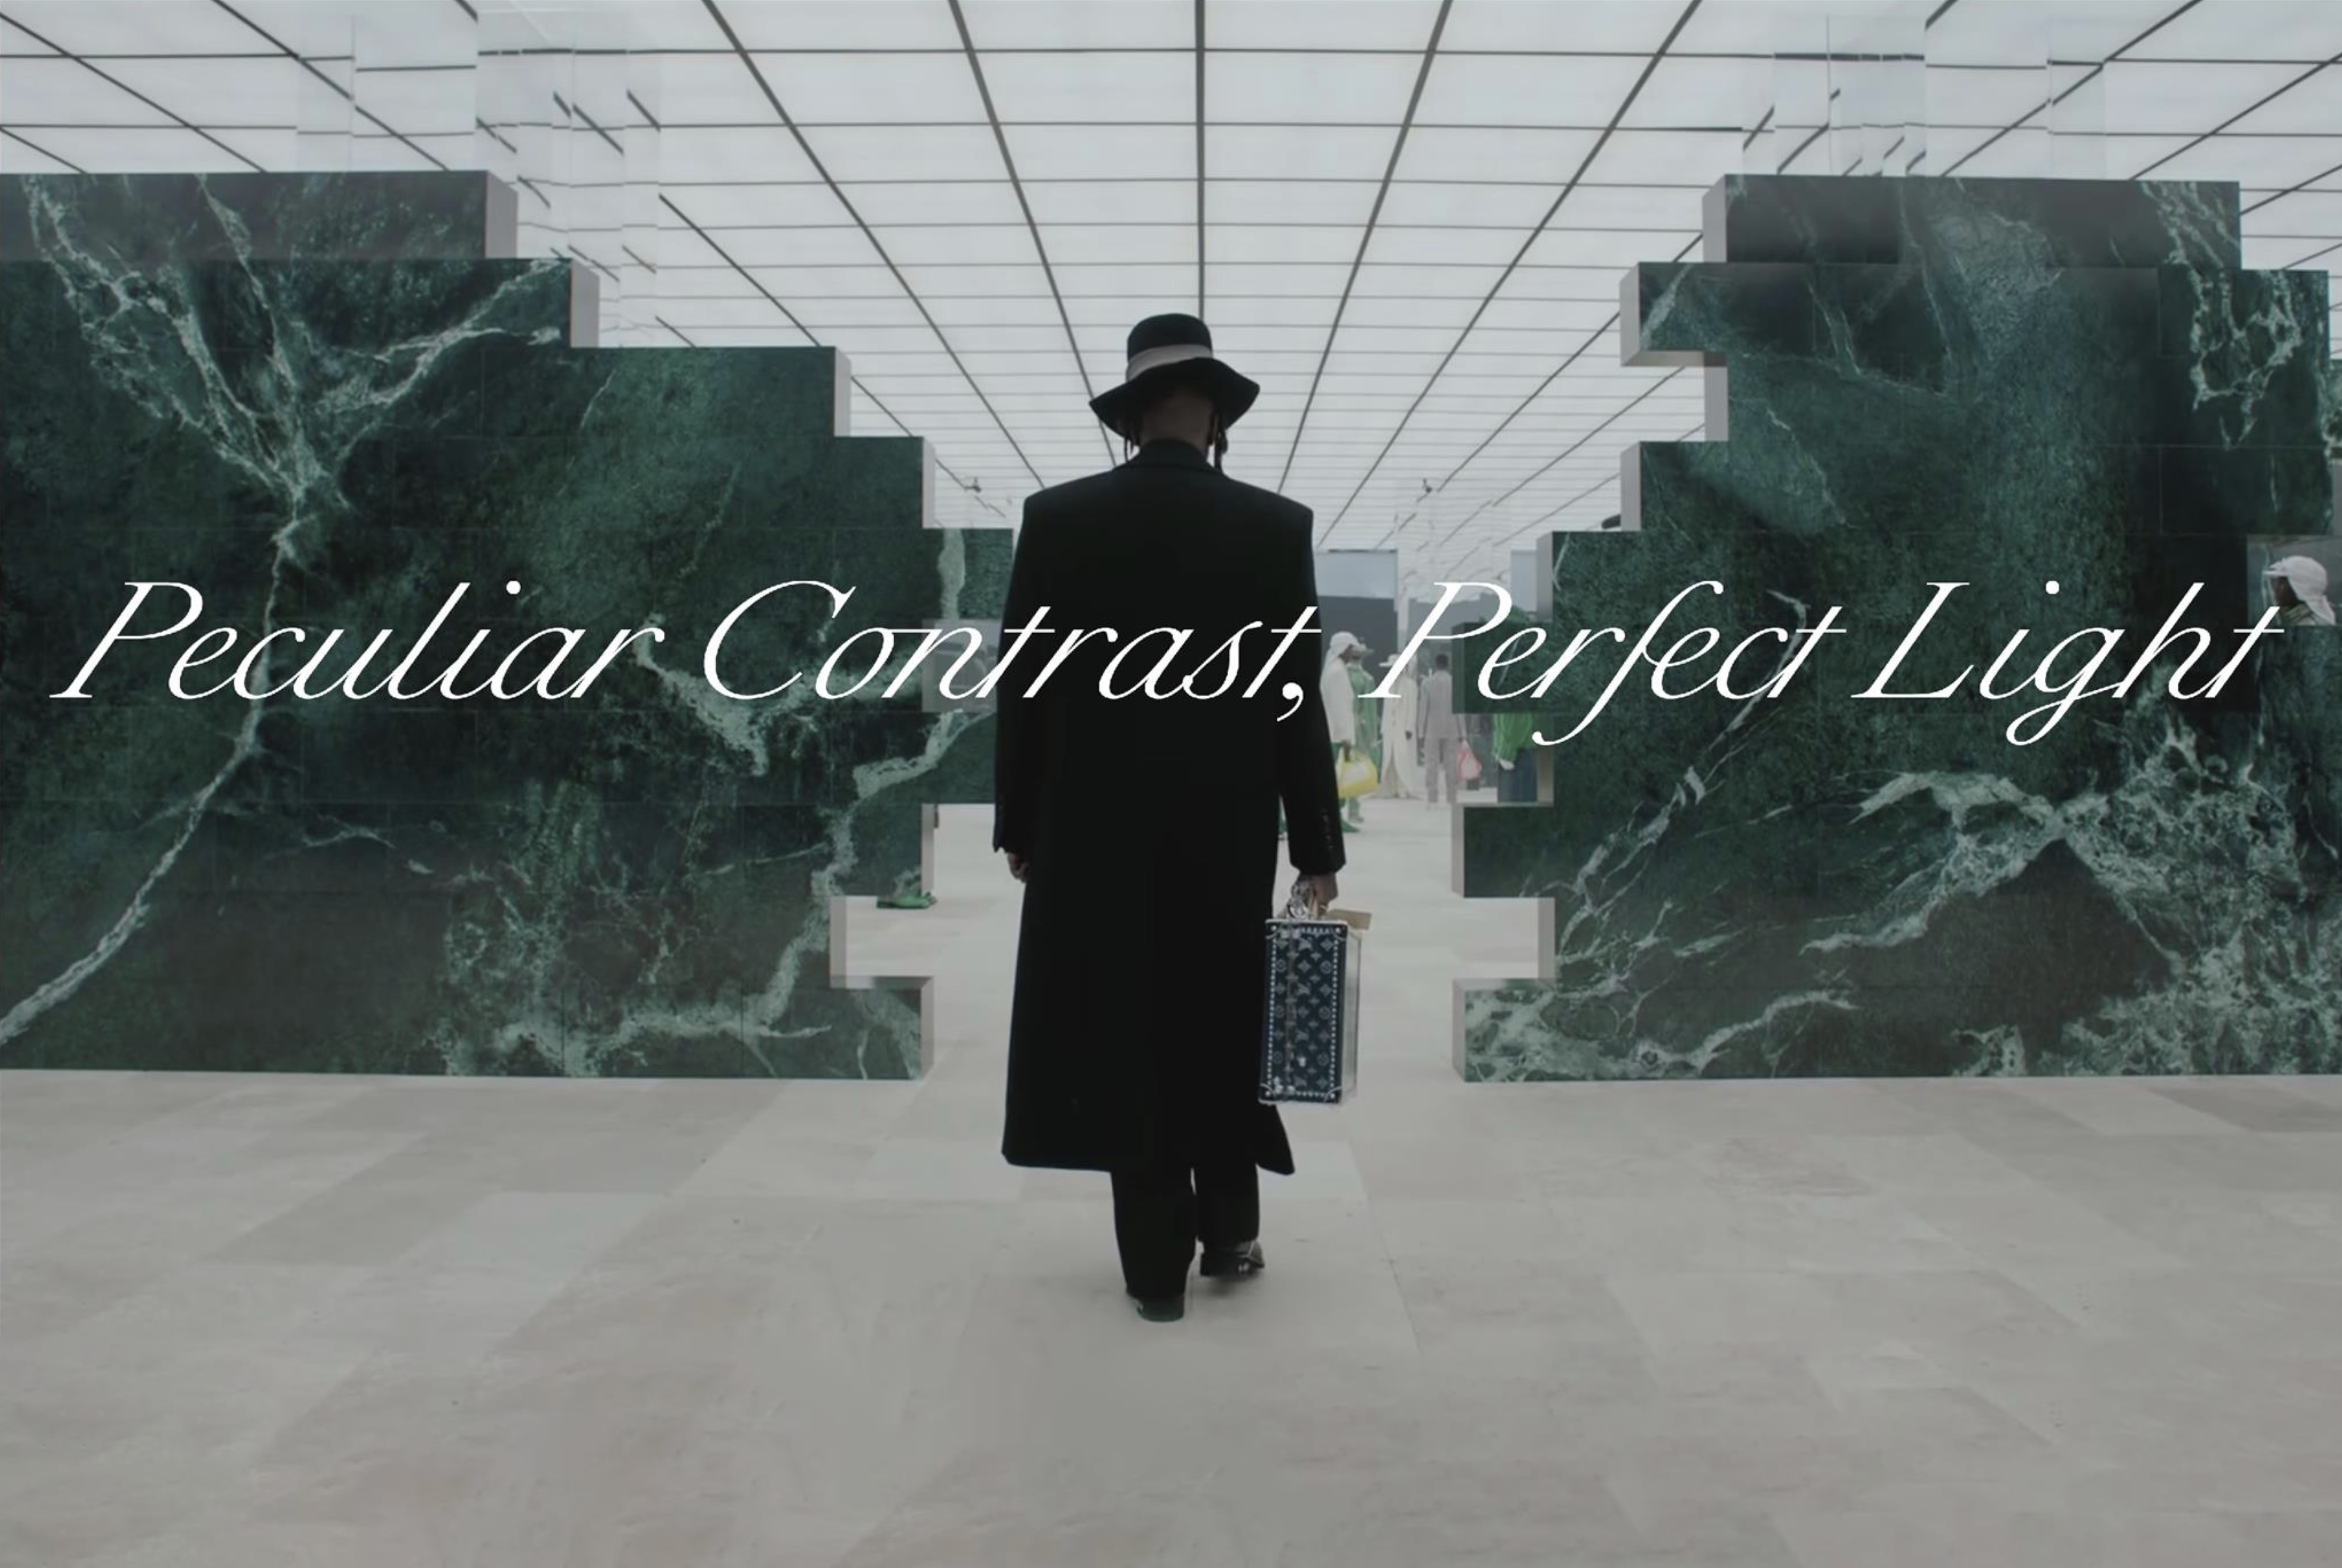 Film still of a person walking away from the viewer into a large room with artistic marble wall dividers overlaid with the words "Peculiar Contrast, Perfect Light."